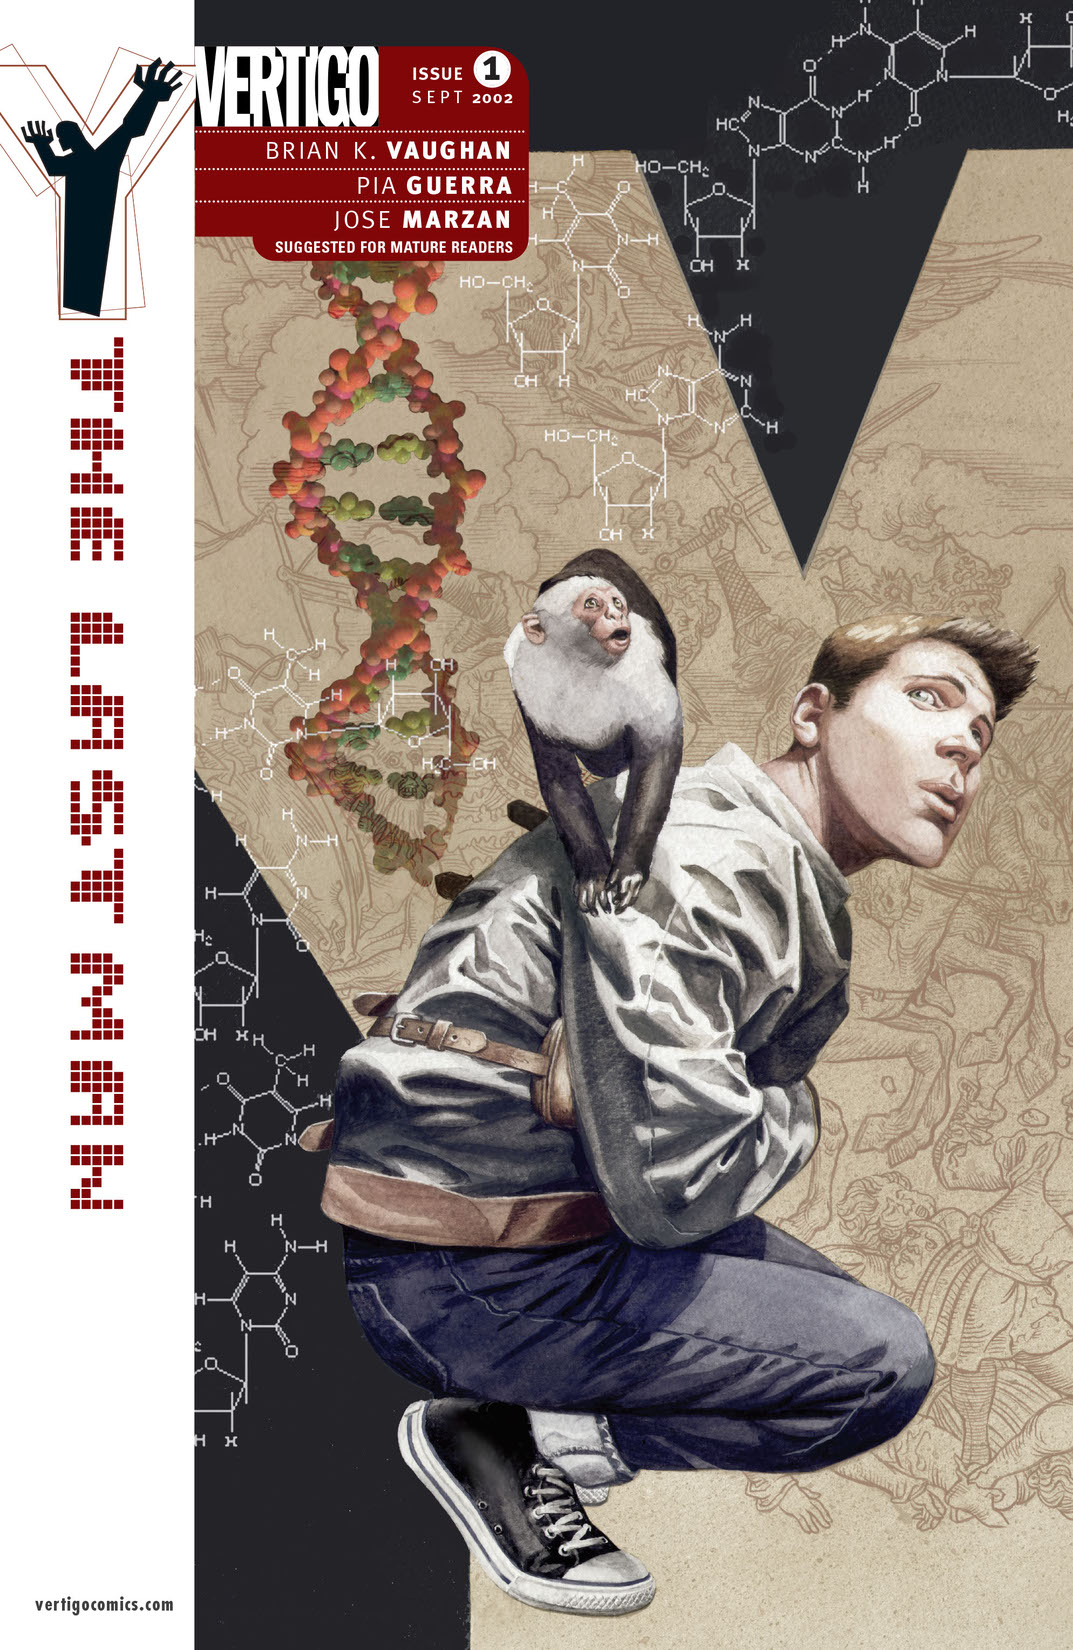 Y: The Last Man #1 preview images